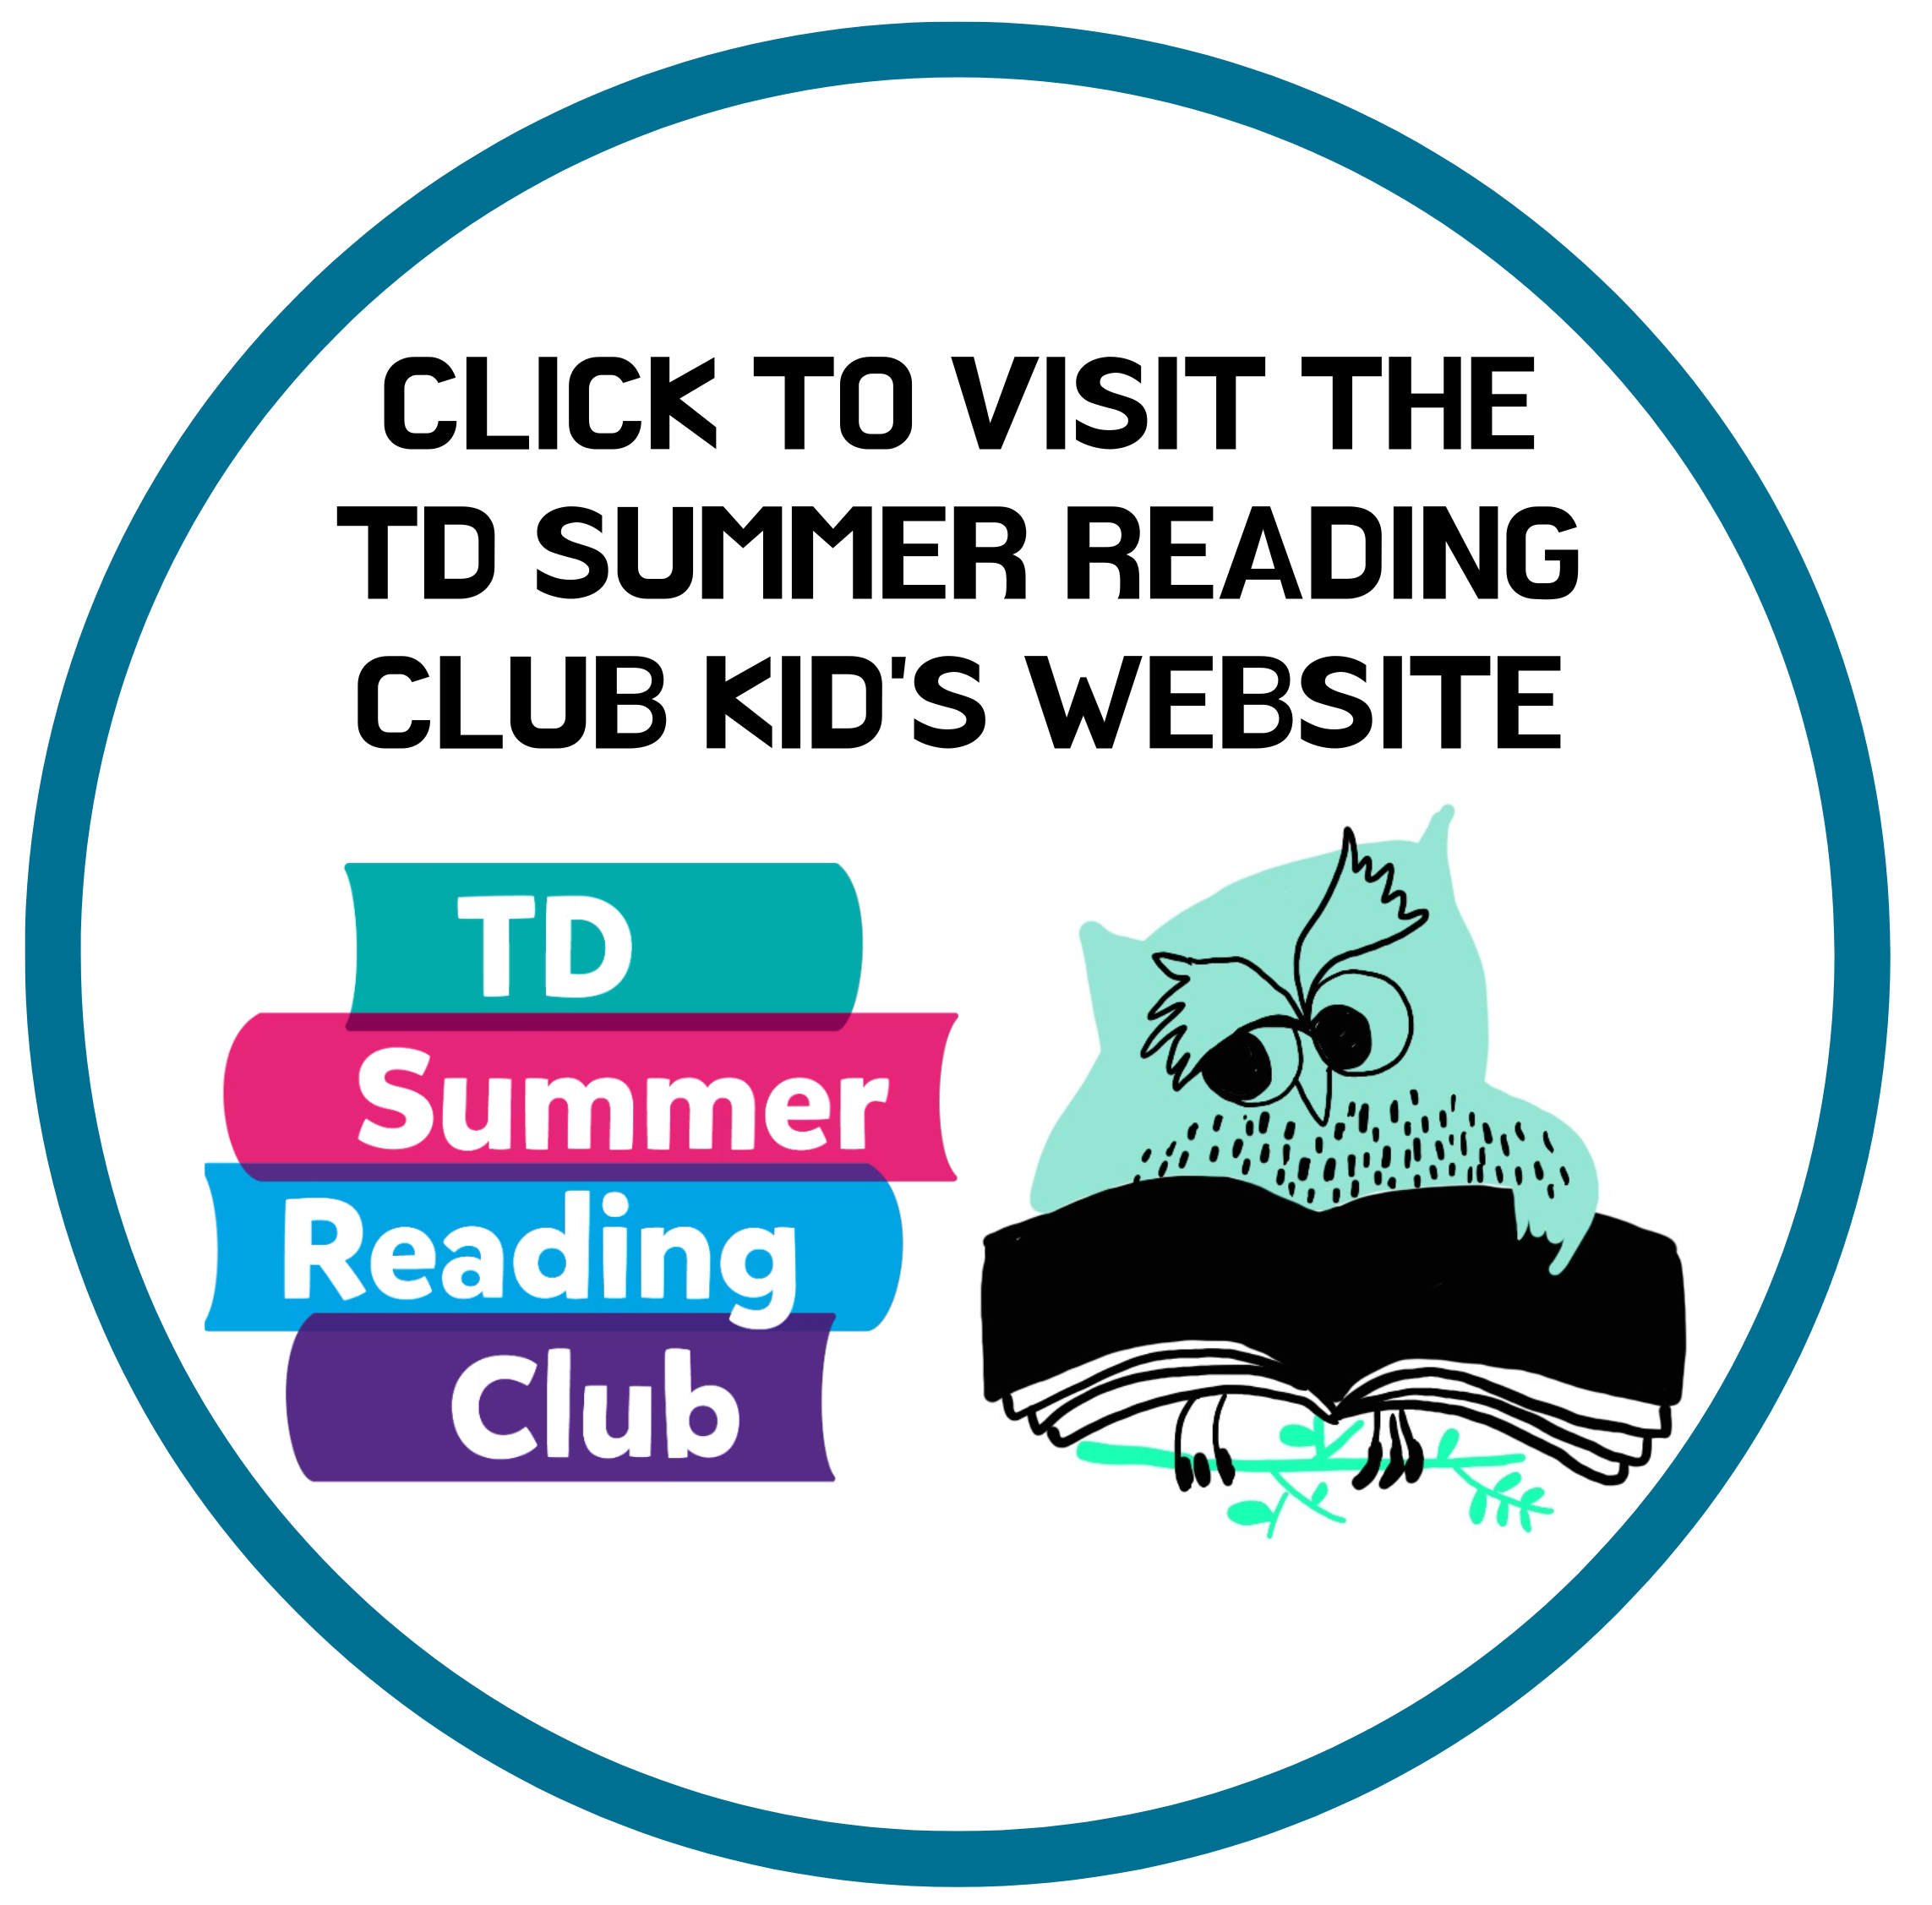 Click to visit the TD Summer Reading Club Kid's Website